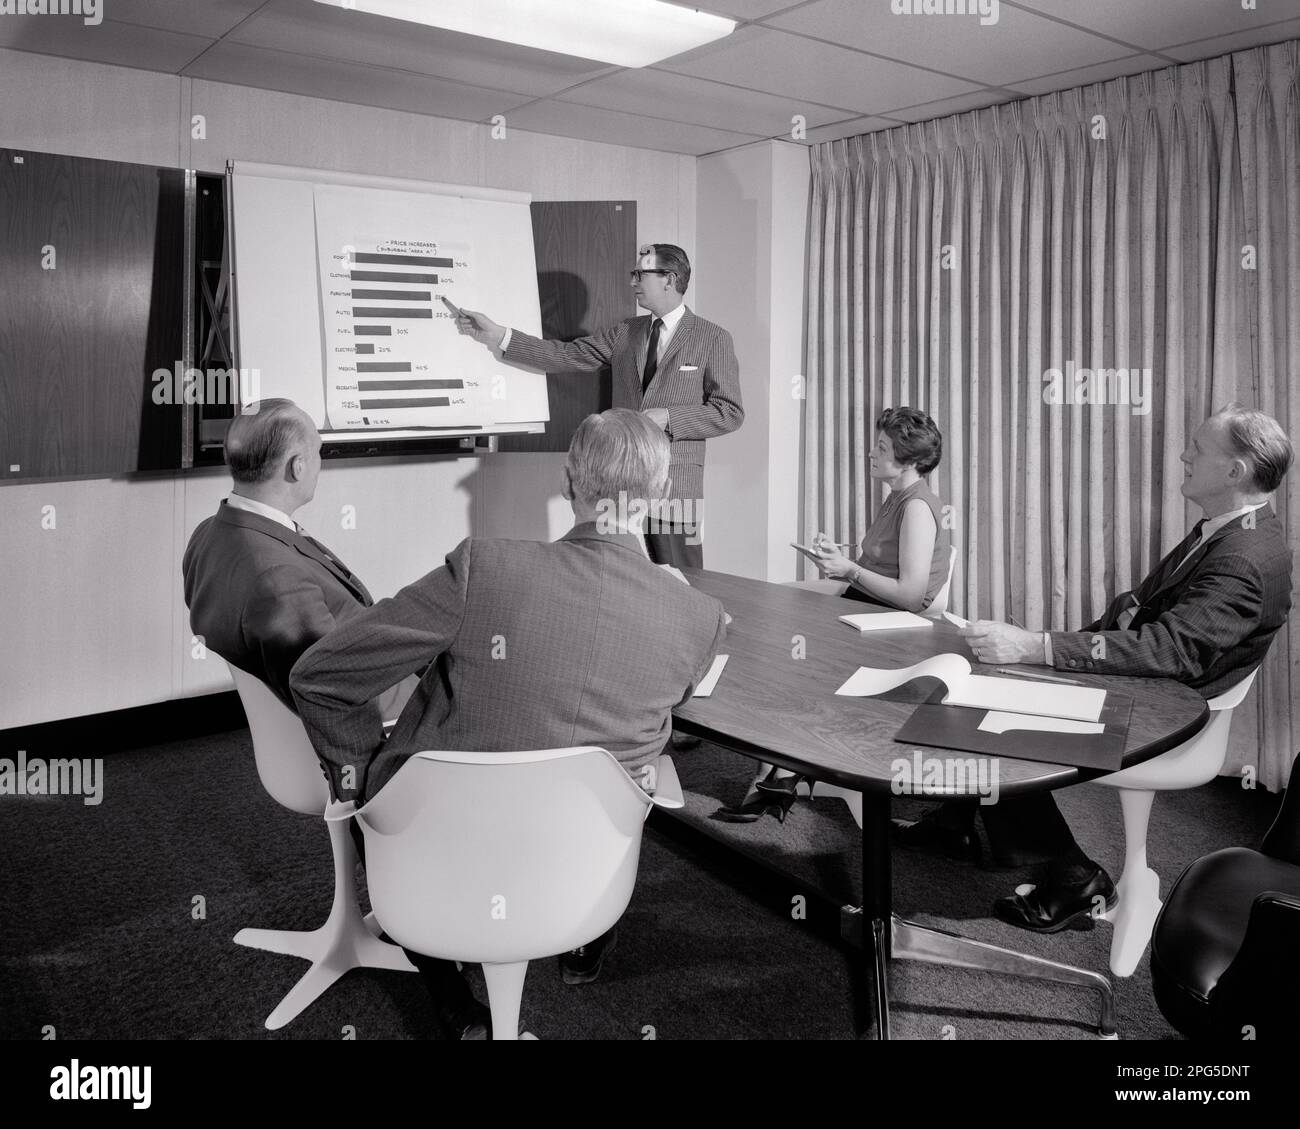 1960s MEN AND WOMEN MEETING IN BUSINESS OFFICE CONFERENCE ROOM LOOKING AT BAR GRAPH VISUAL AID SITTING IN TULIP ARMCHAIRS - o2508 HAR001 HARS INFORMATION ASSISTANT LIFESTYLE CLERK FIVE FEMALES 5 DECISION MANAGER COPY SPACE HALF-LENGTH LADIES PERSONS INSPIRATION MALES EXECUTIVES MIDDLE-AGED B&W MIDDLE-AGED MAN VISUAL GOALS SUIT AND TIE GRAPH STRATEGY AND LEADERSHIP OFFICE WORKER OCCUPATIONS BOSSES GAL FRIDAY ADMINISTRATOR SECRETARIES SUPPORT ARMCHAIRS EERO SAARINEN AMANUENSIS COOPERATION MANAGERS MID-ADULT MID-ADULT MAN MID-ADULT WOMAN SOLUTIONS TOGETHERNESS TULIP BLACK AND WHITE CLERICAL Stock Photo